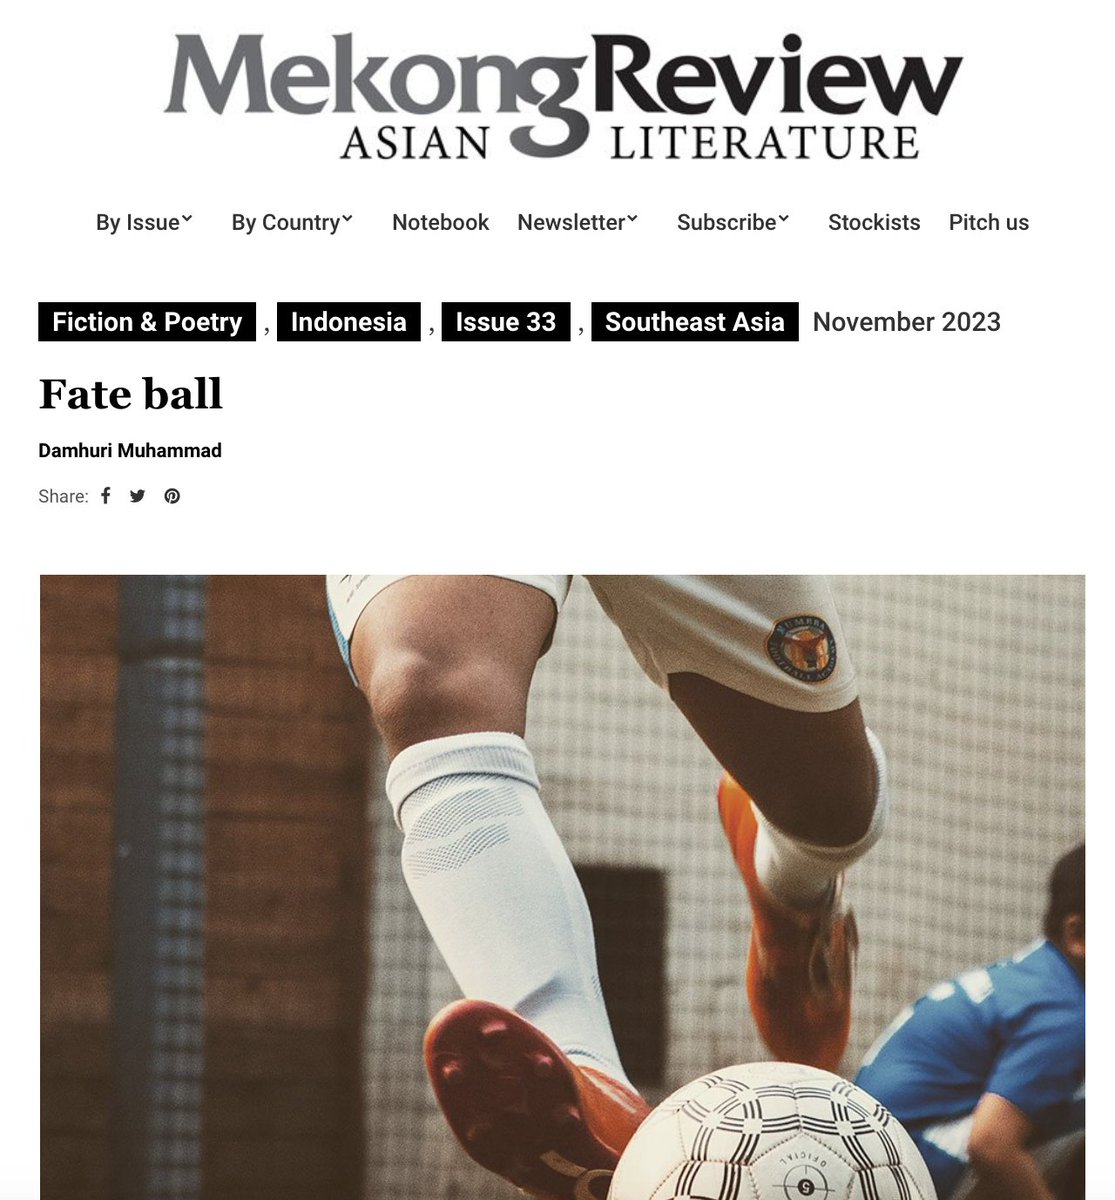 a short fiction about the big dreams of young Indonesian people to become professional football players. Thank you @MekongReview for giving a home for my new piece #Fateball #WritingCommunity mekongreview.com/fate-ball/